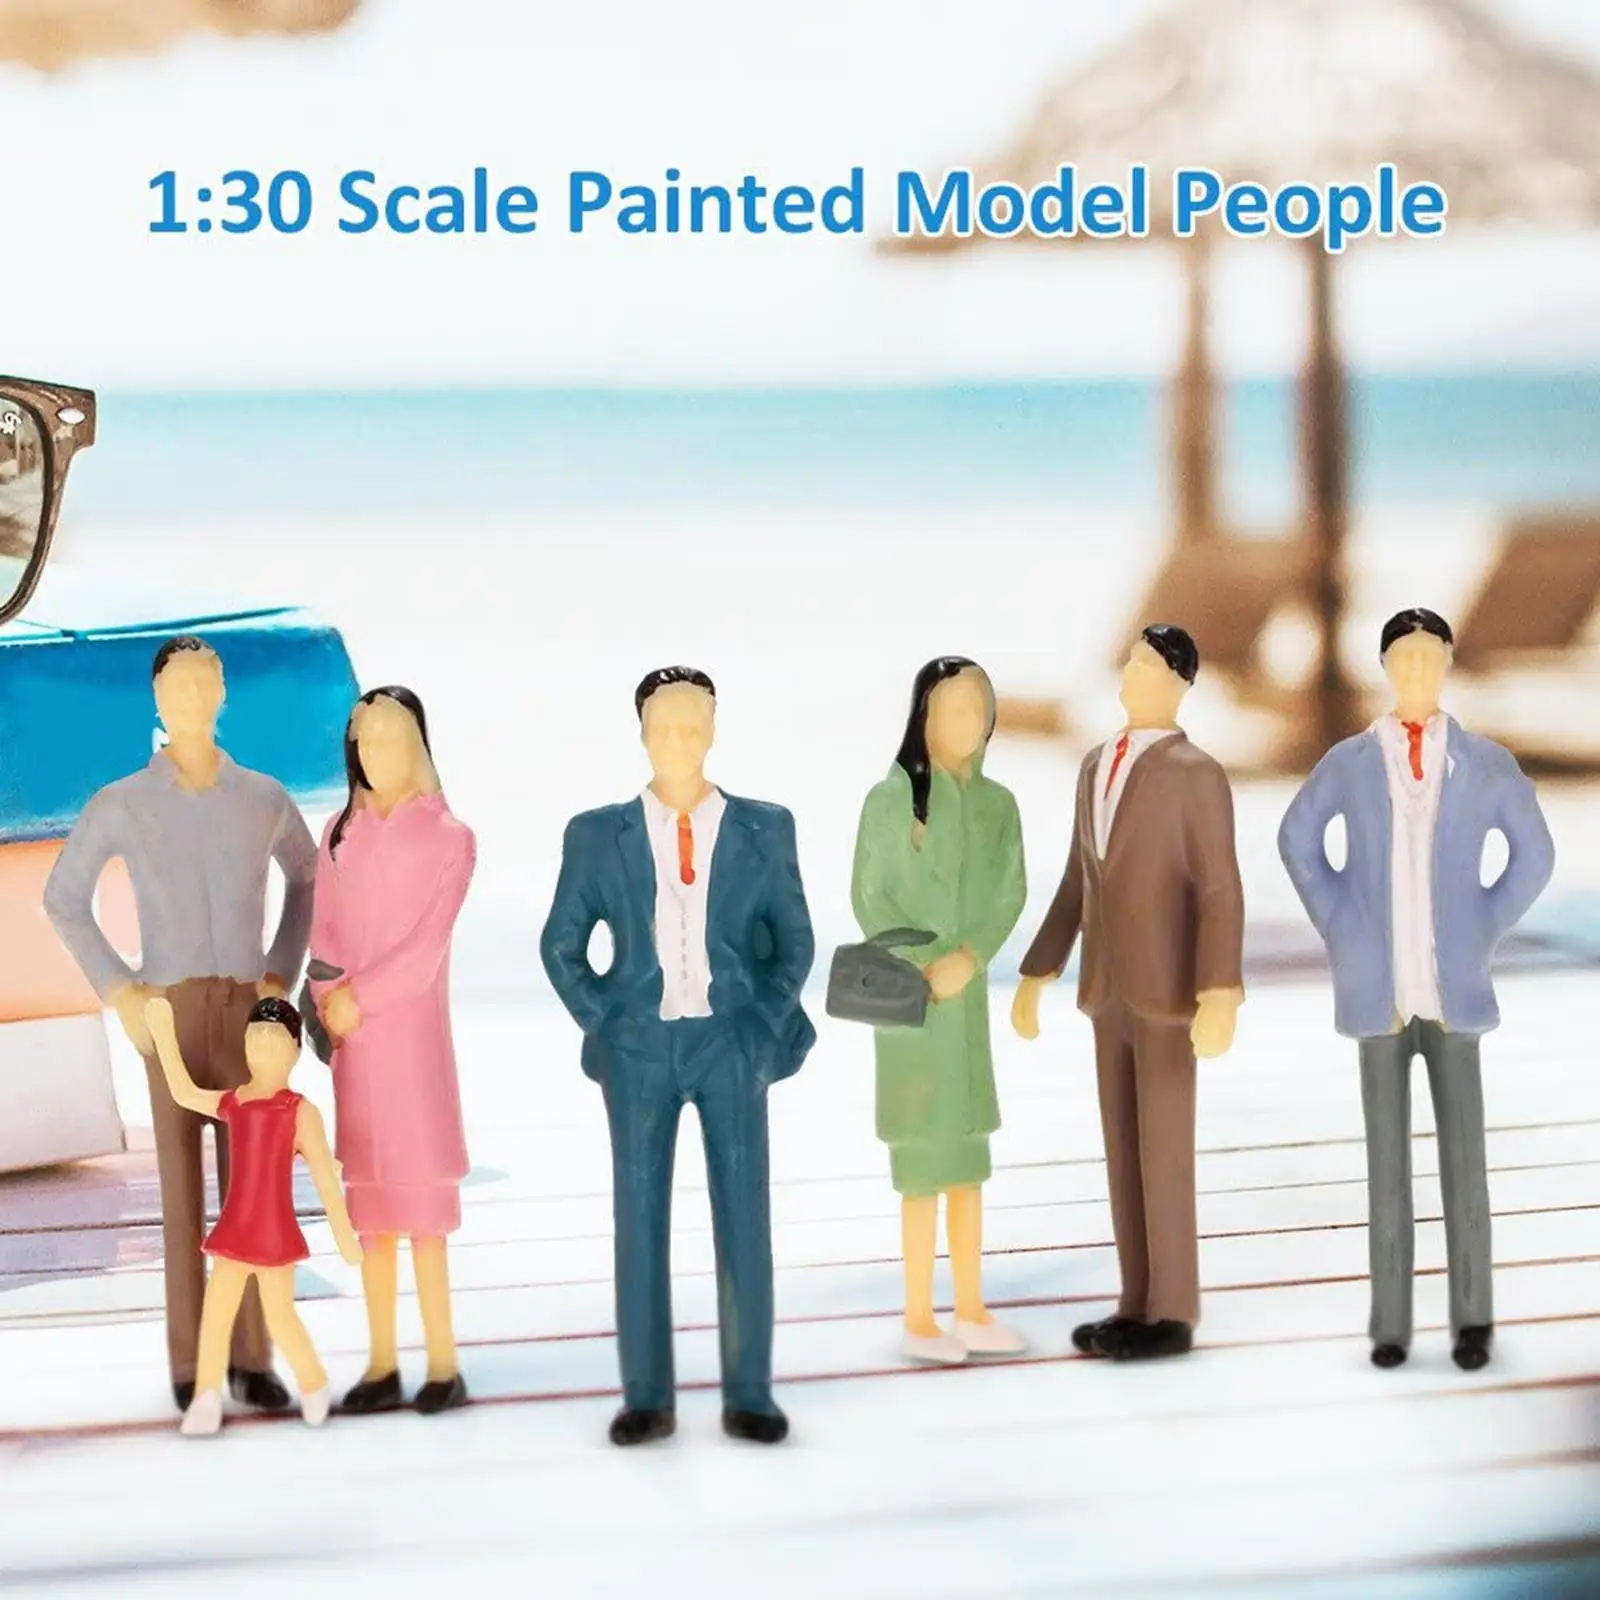 Pack of 50 1/30 Figures Sitting and Standing People Passengers Models for Train Platform Railway Playset Miniature Scenes